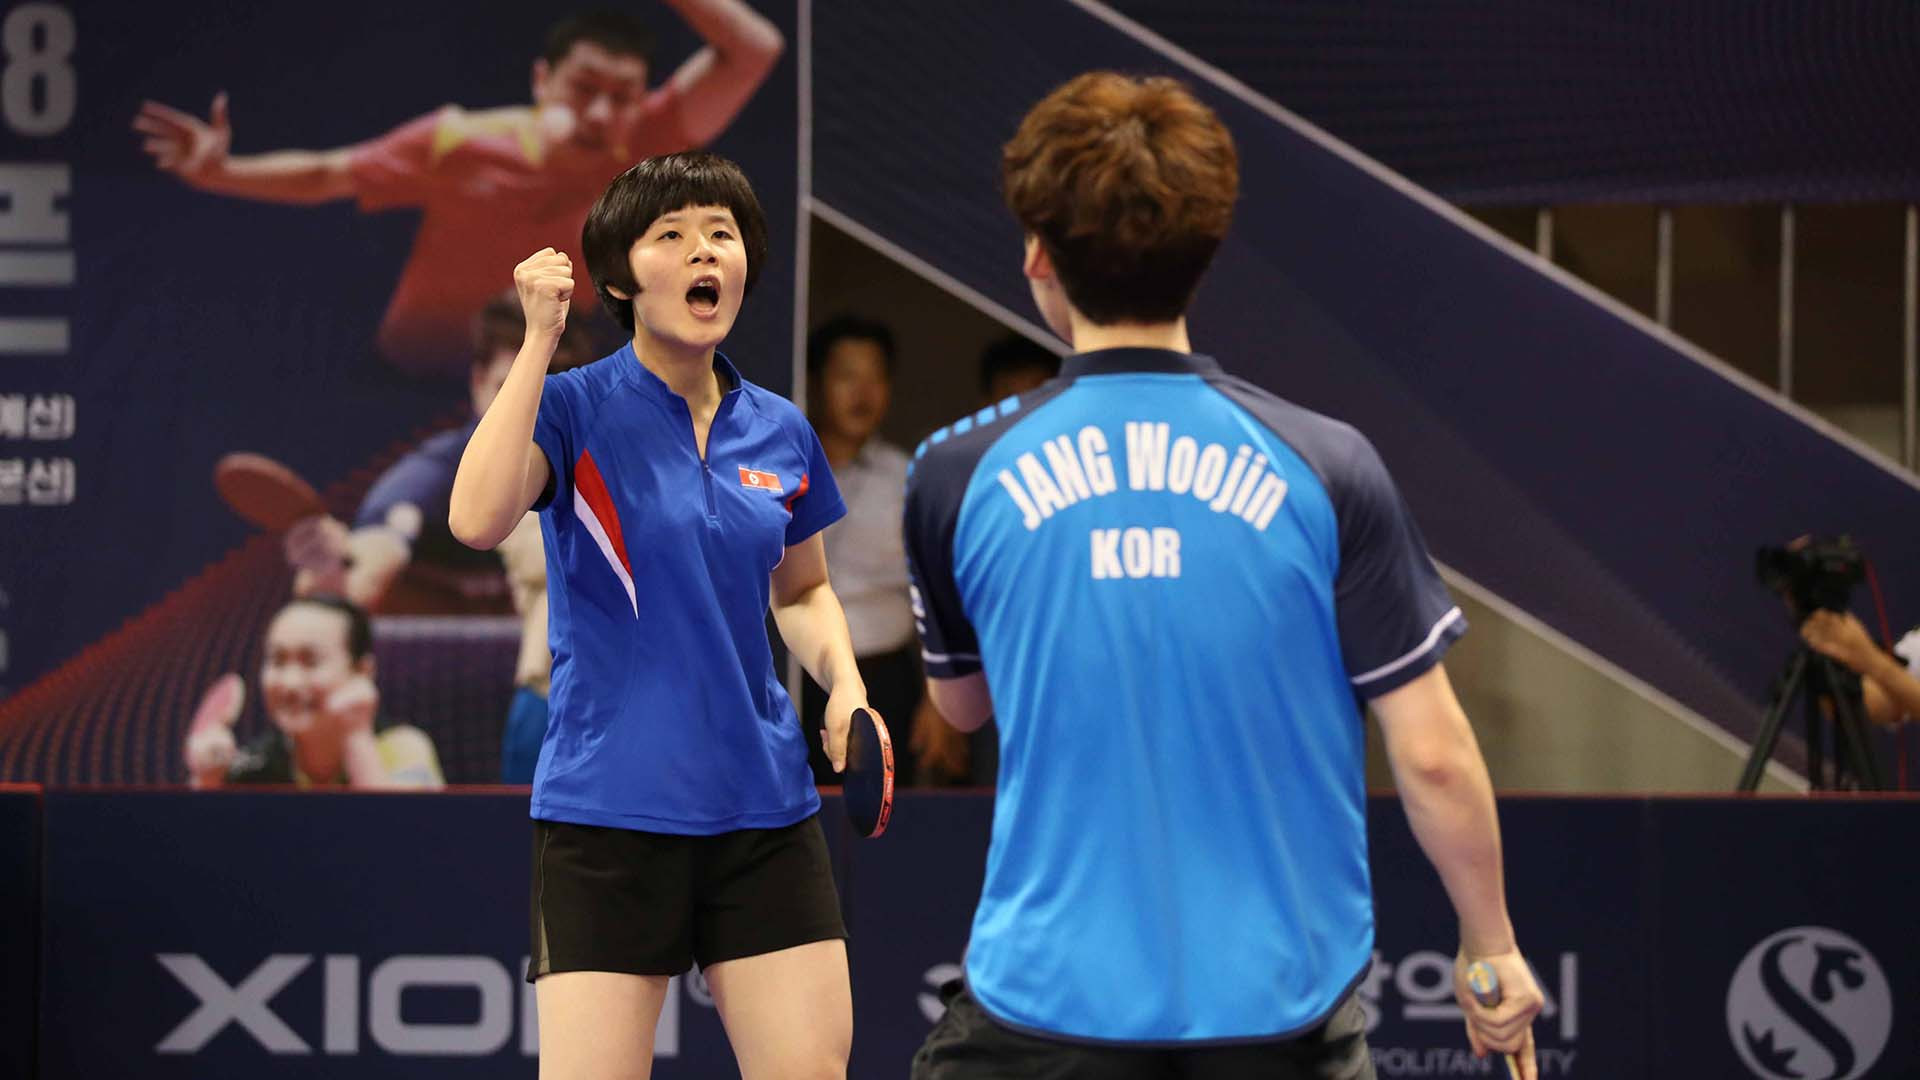 Unified mixed doubles team makes final at ITTF Korea Open